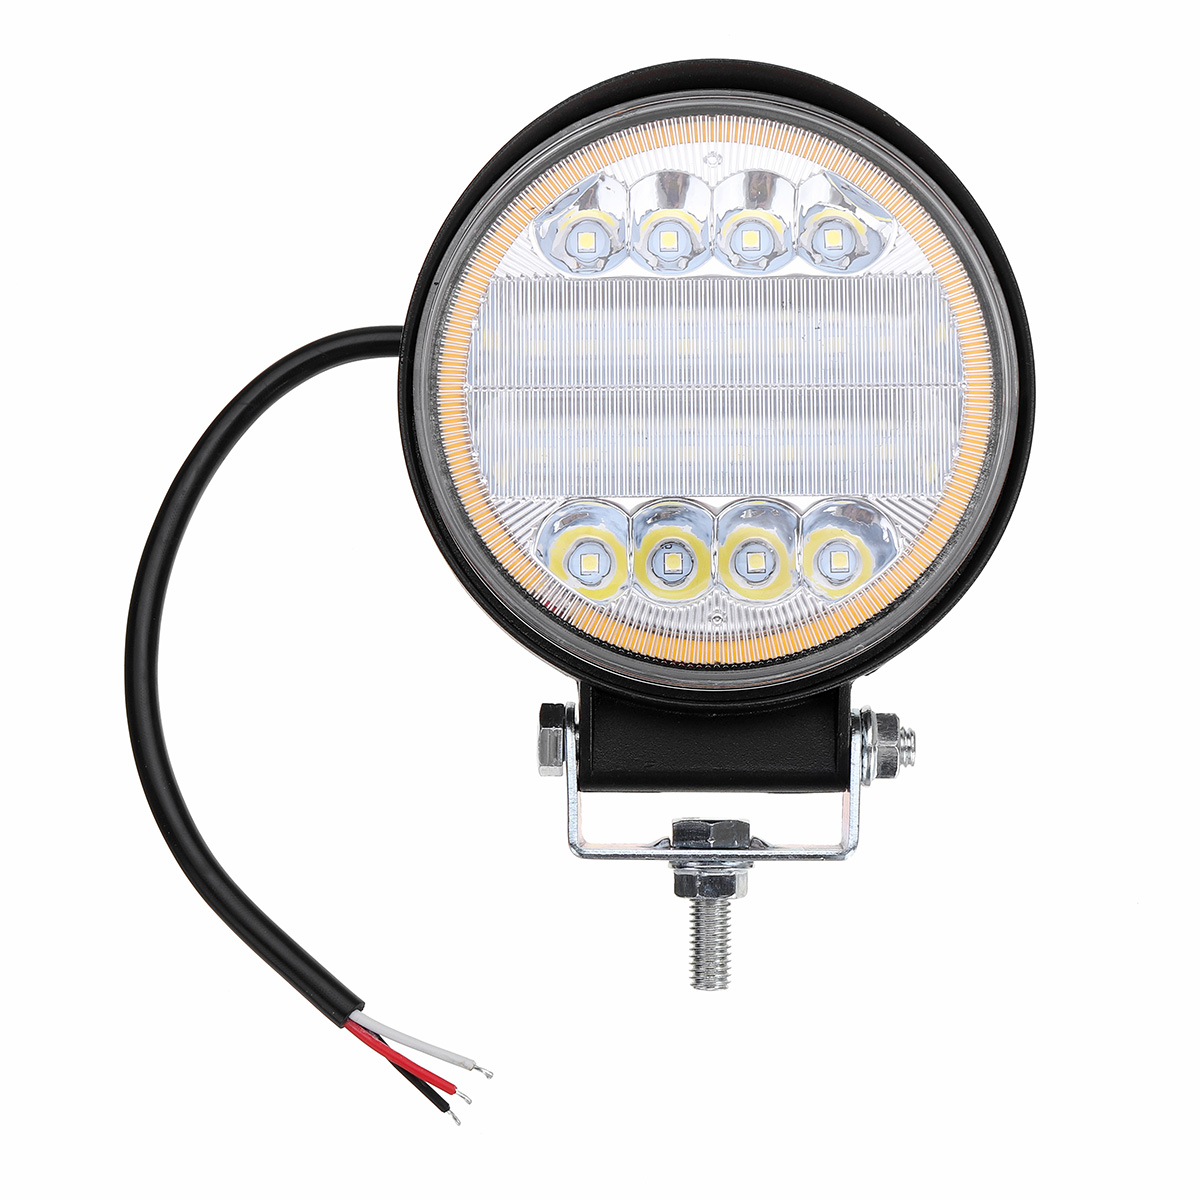 126W LED Work Light Yellow Beam Lamp DRL Amber Angel Eye Light for Car Motorcycle Off-Road Truck - Auto GoShop